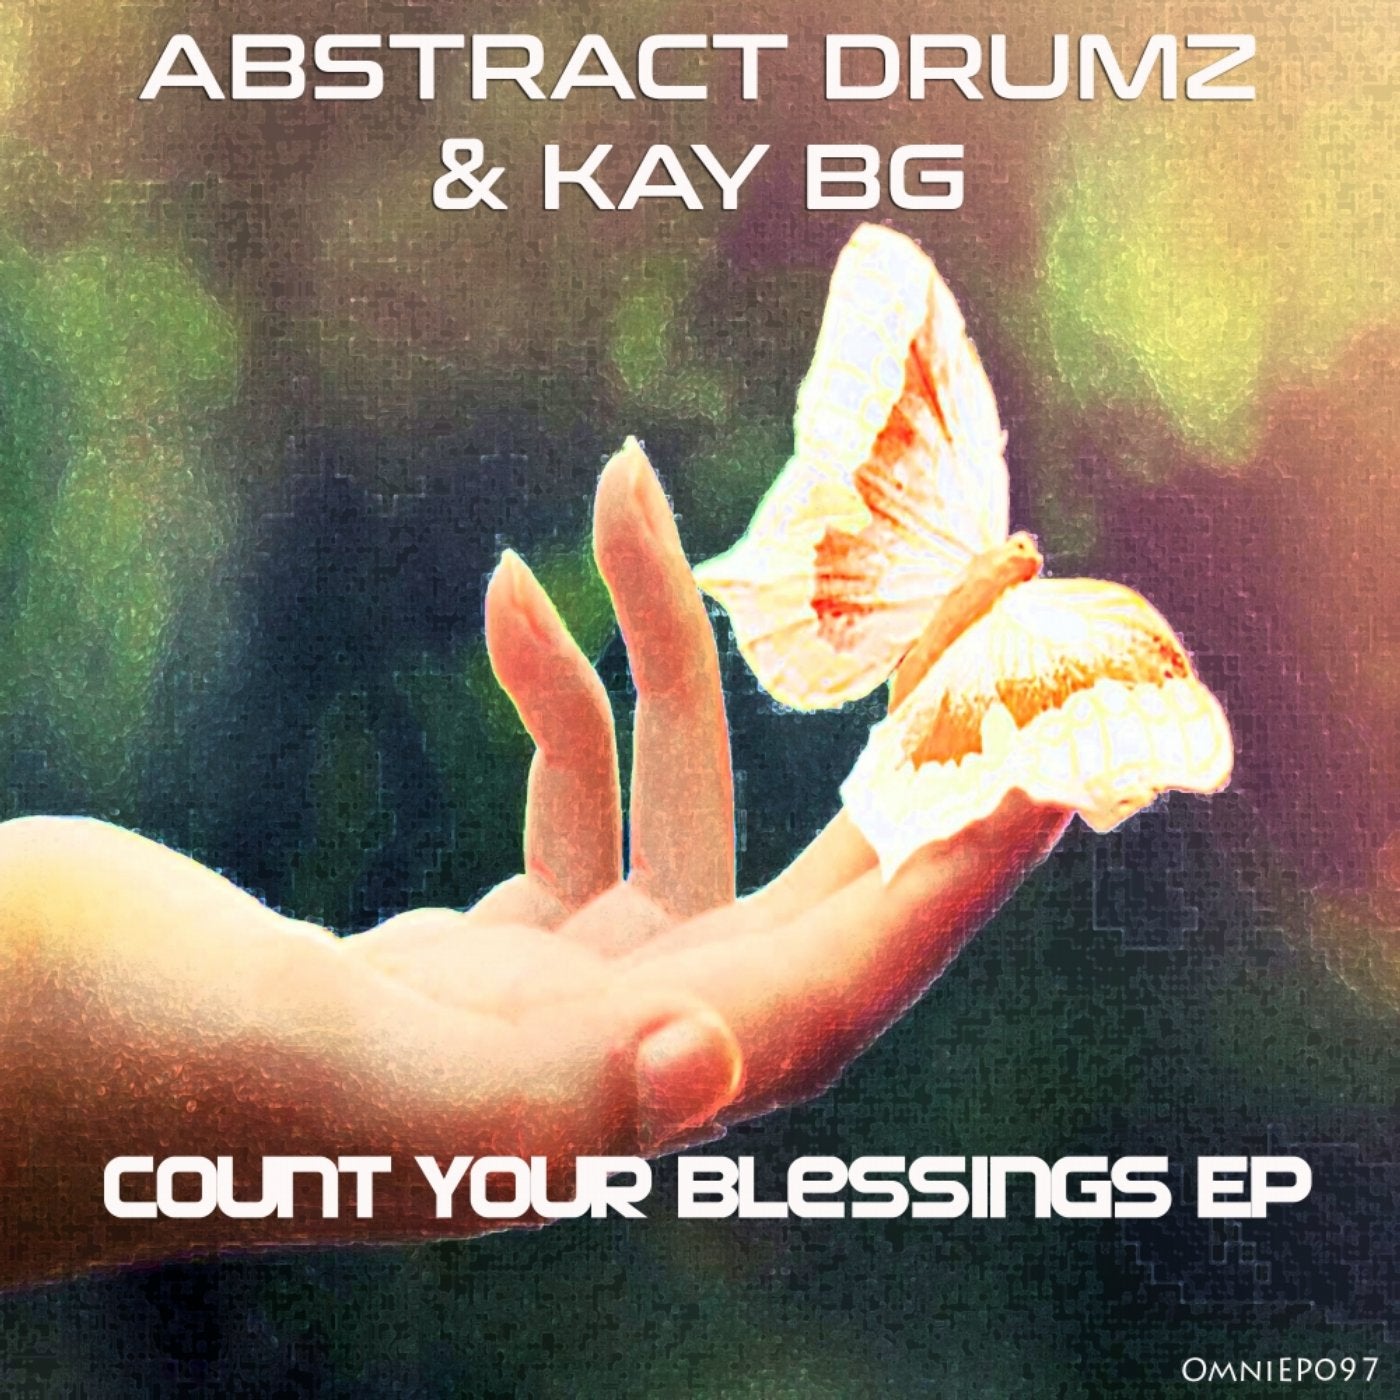 Count Your Blessings EP